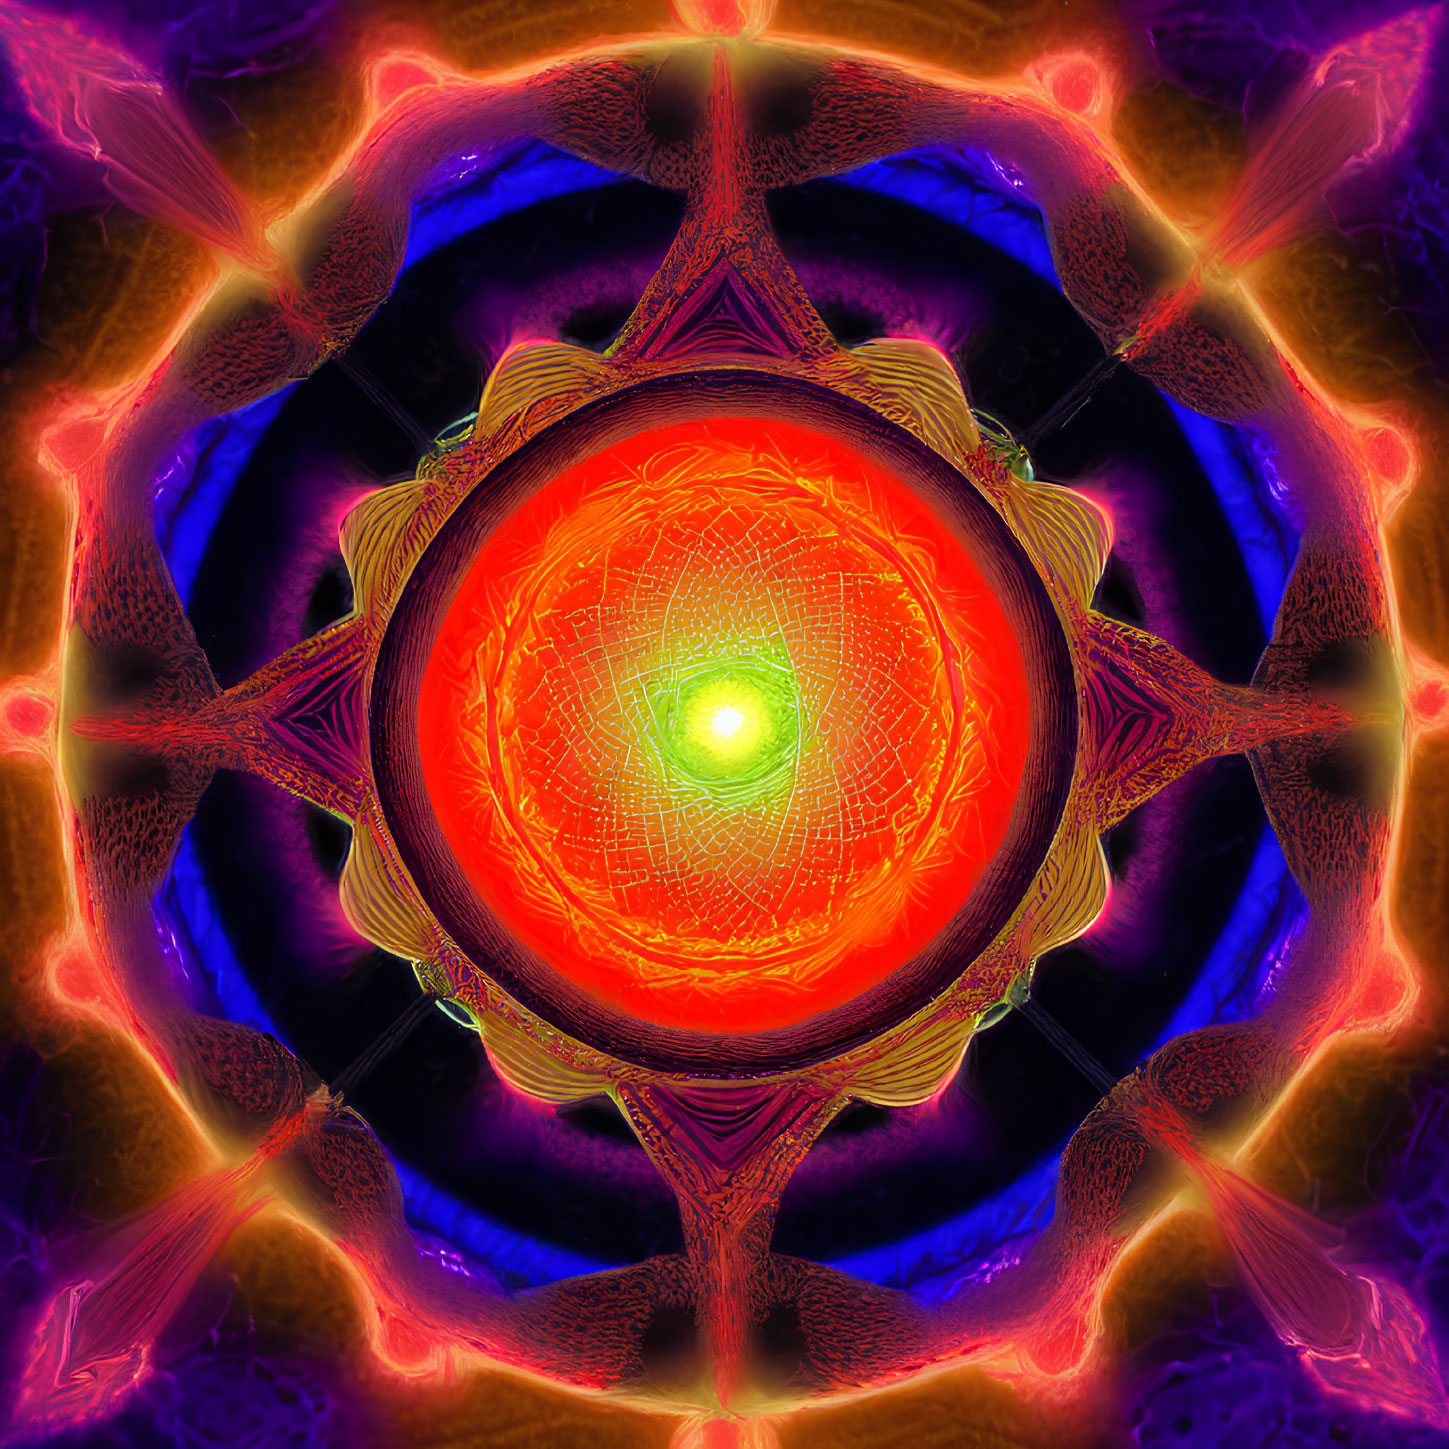 Colorful Digital Mandala with Orange Core and Symmetrical Patterns in Purple, Blue, and Red H